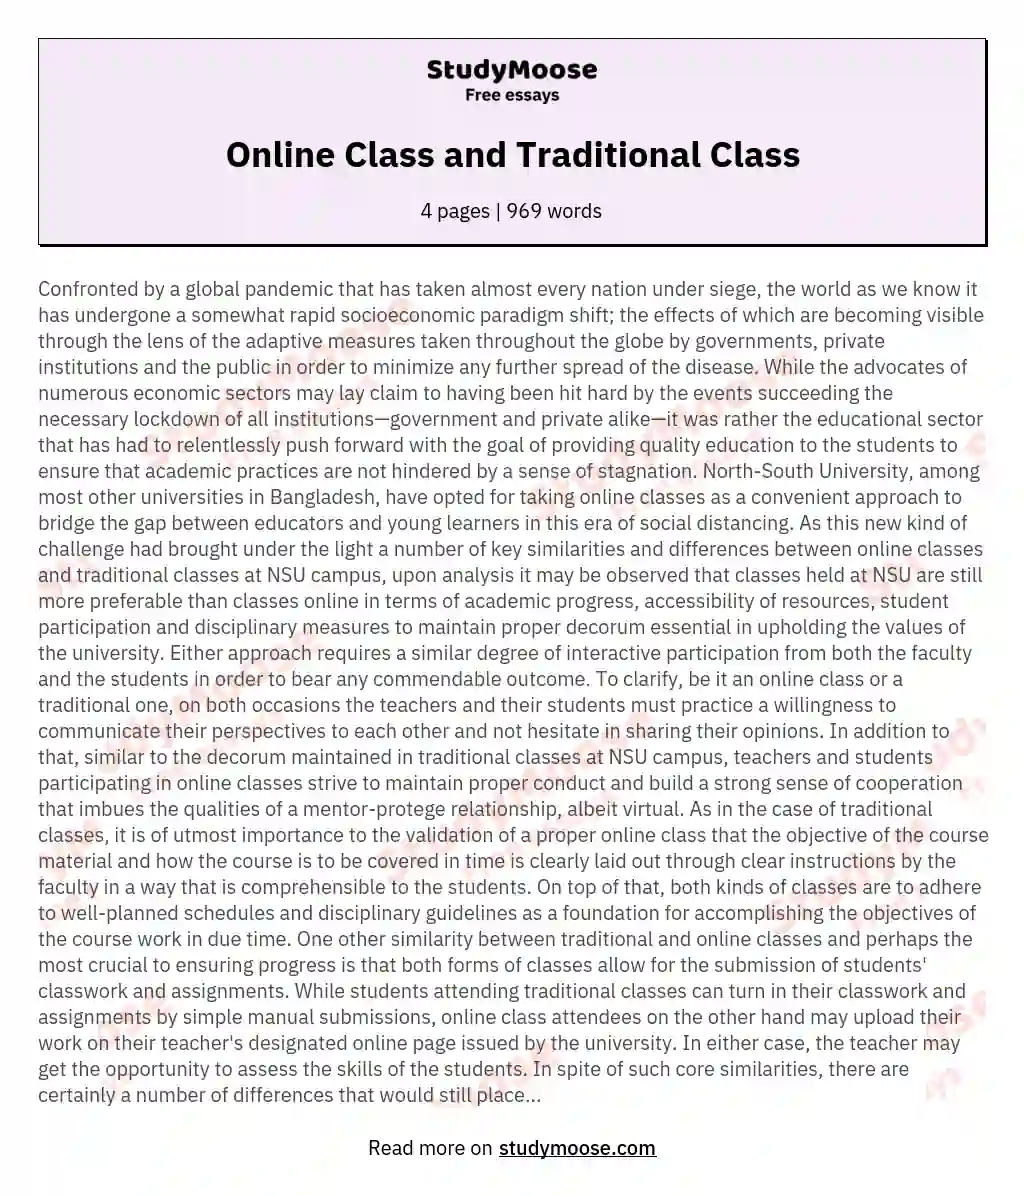 Online Class and Traditional Class essay